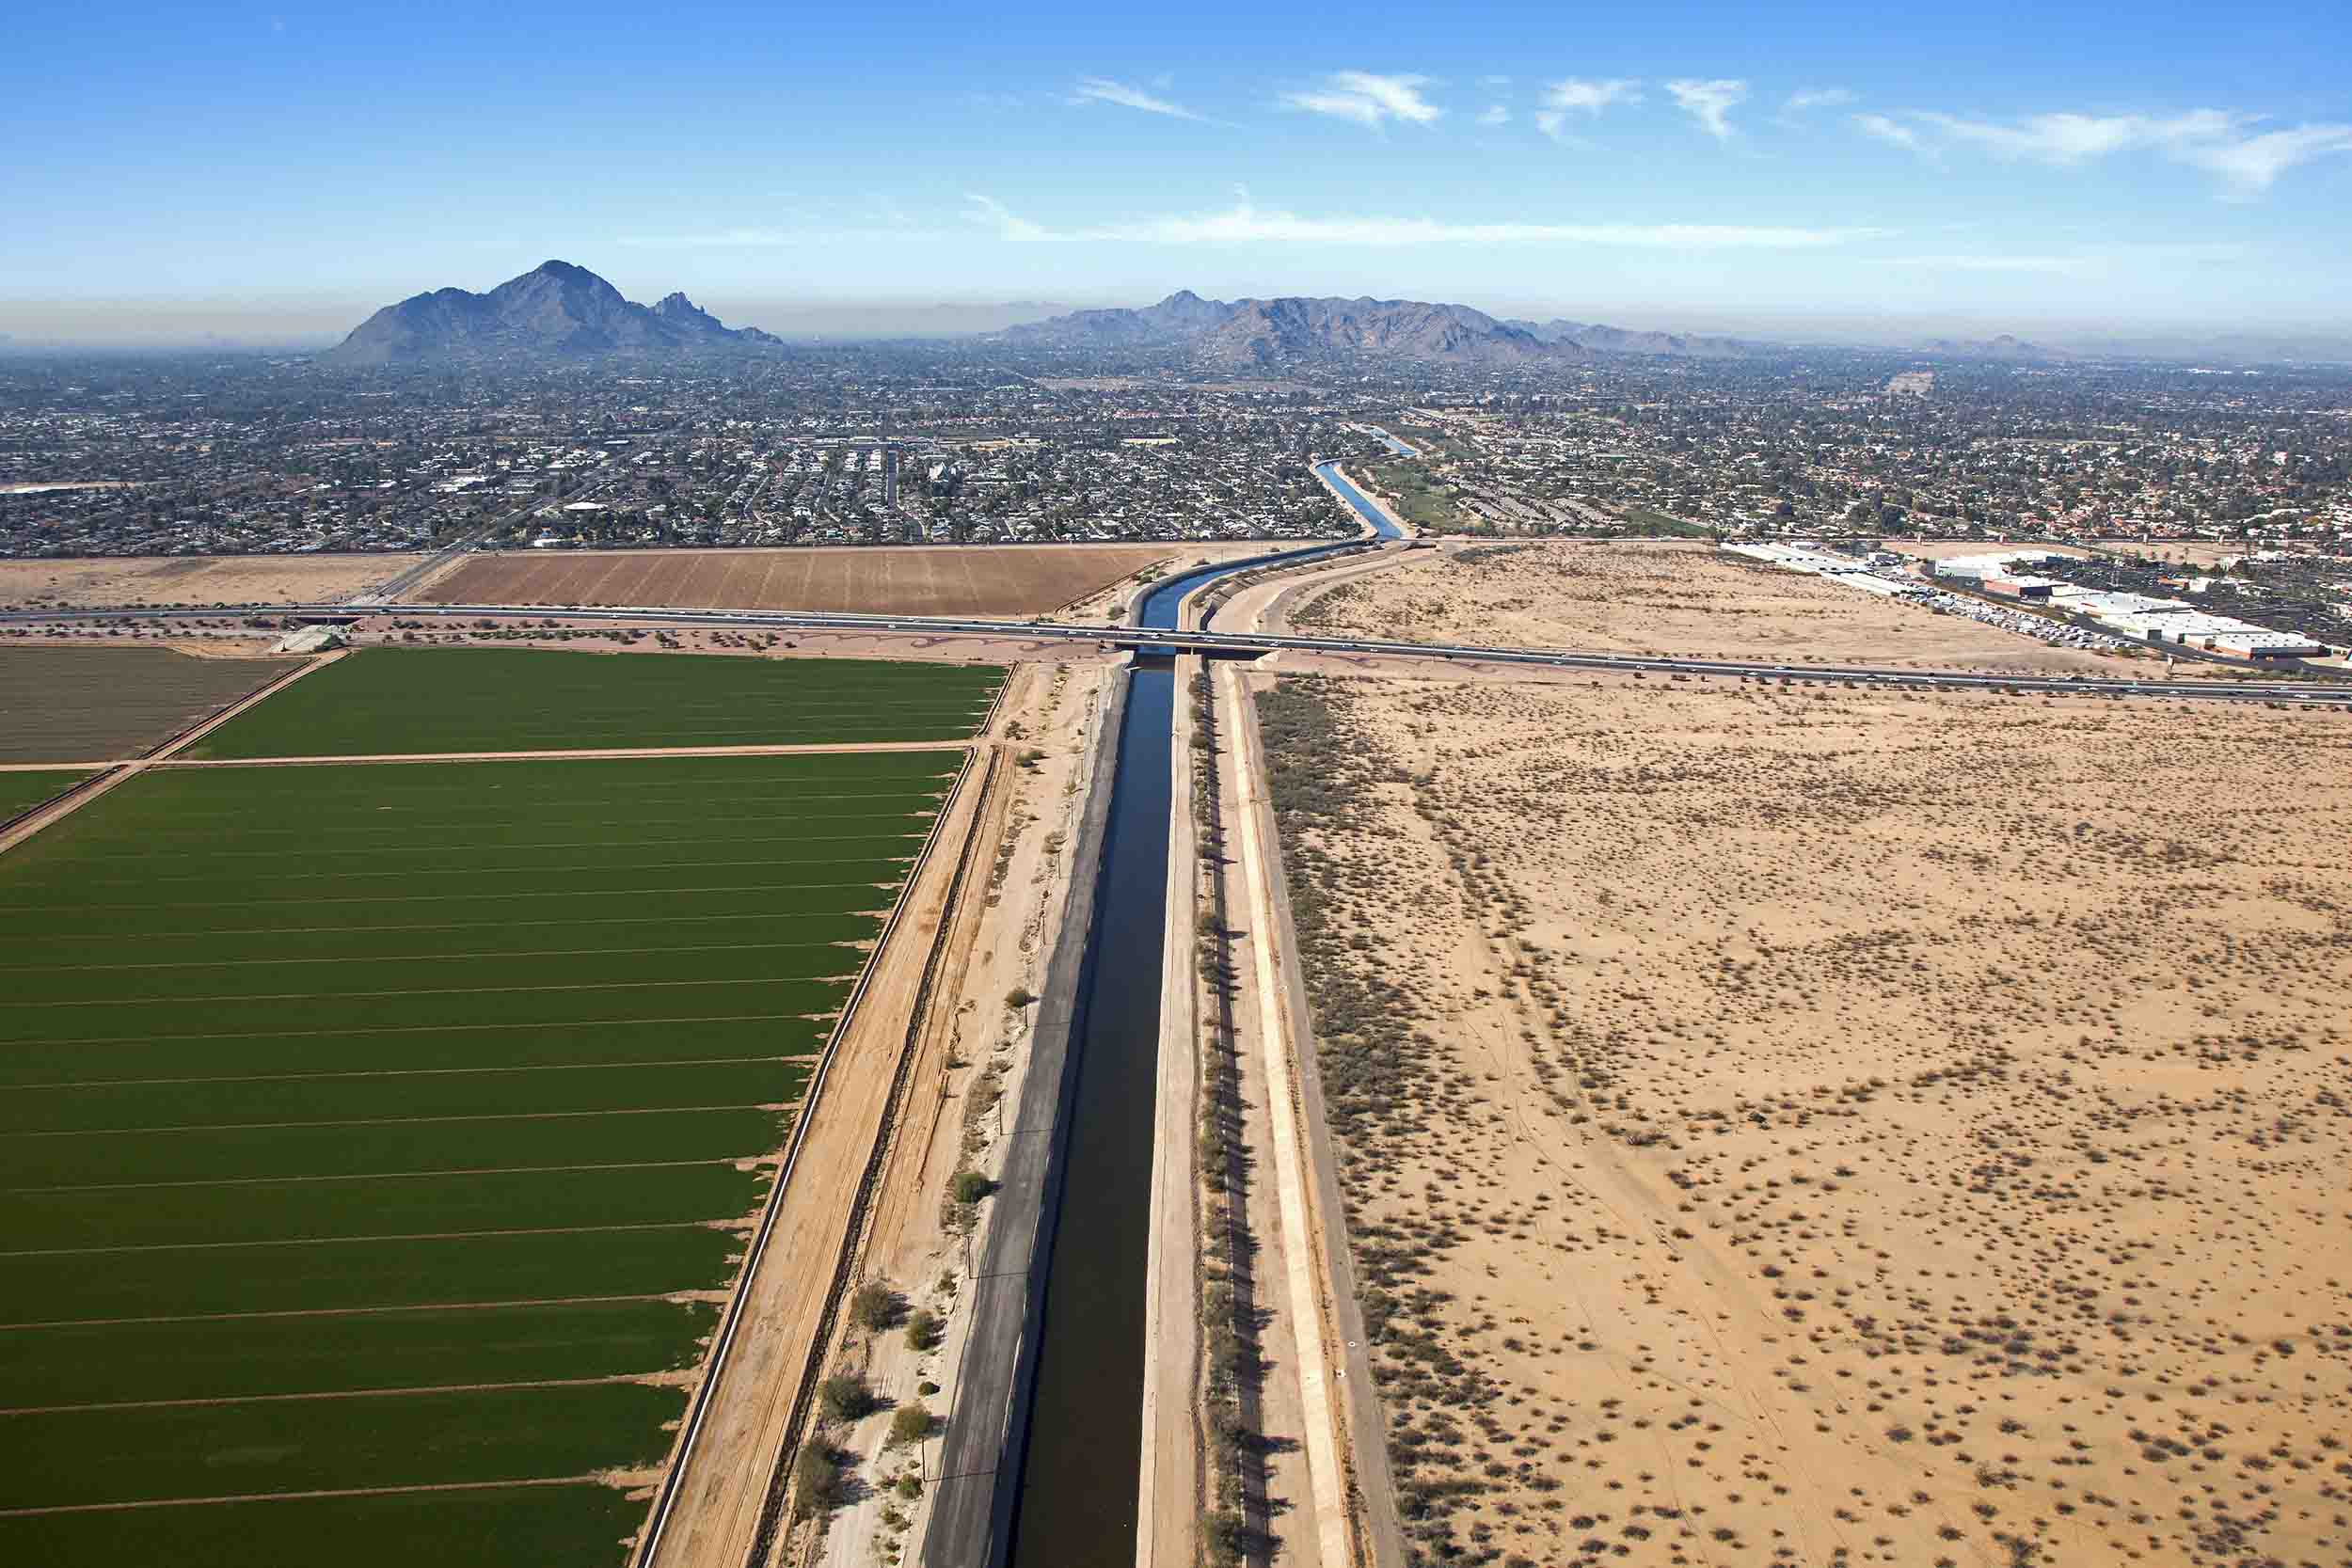 Aerial view of Phoenix, Arizona which showcases the Central Arizona Project (CAP) canals, which bring water to the city